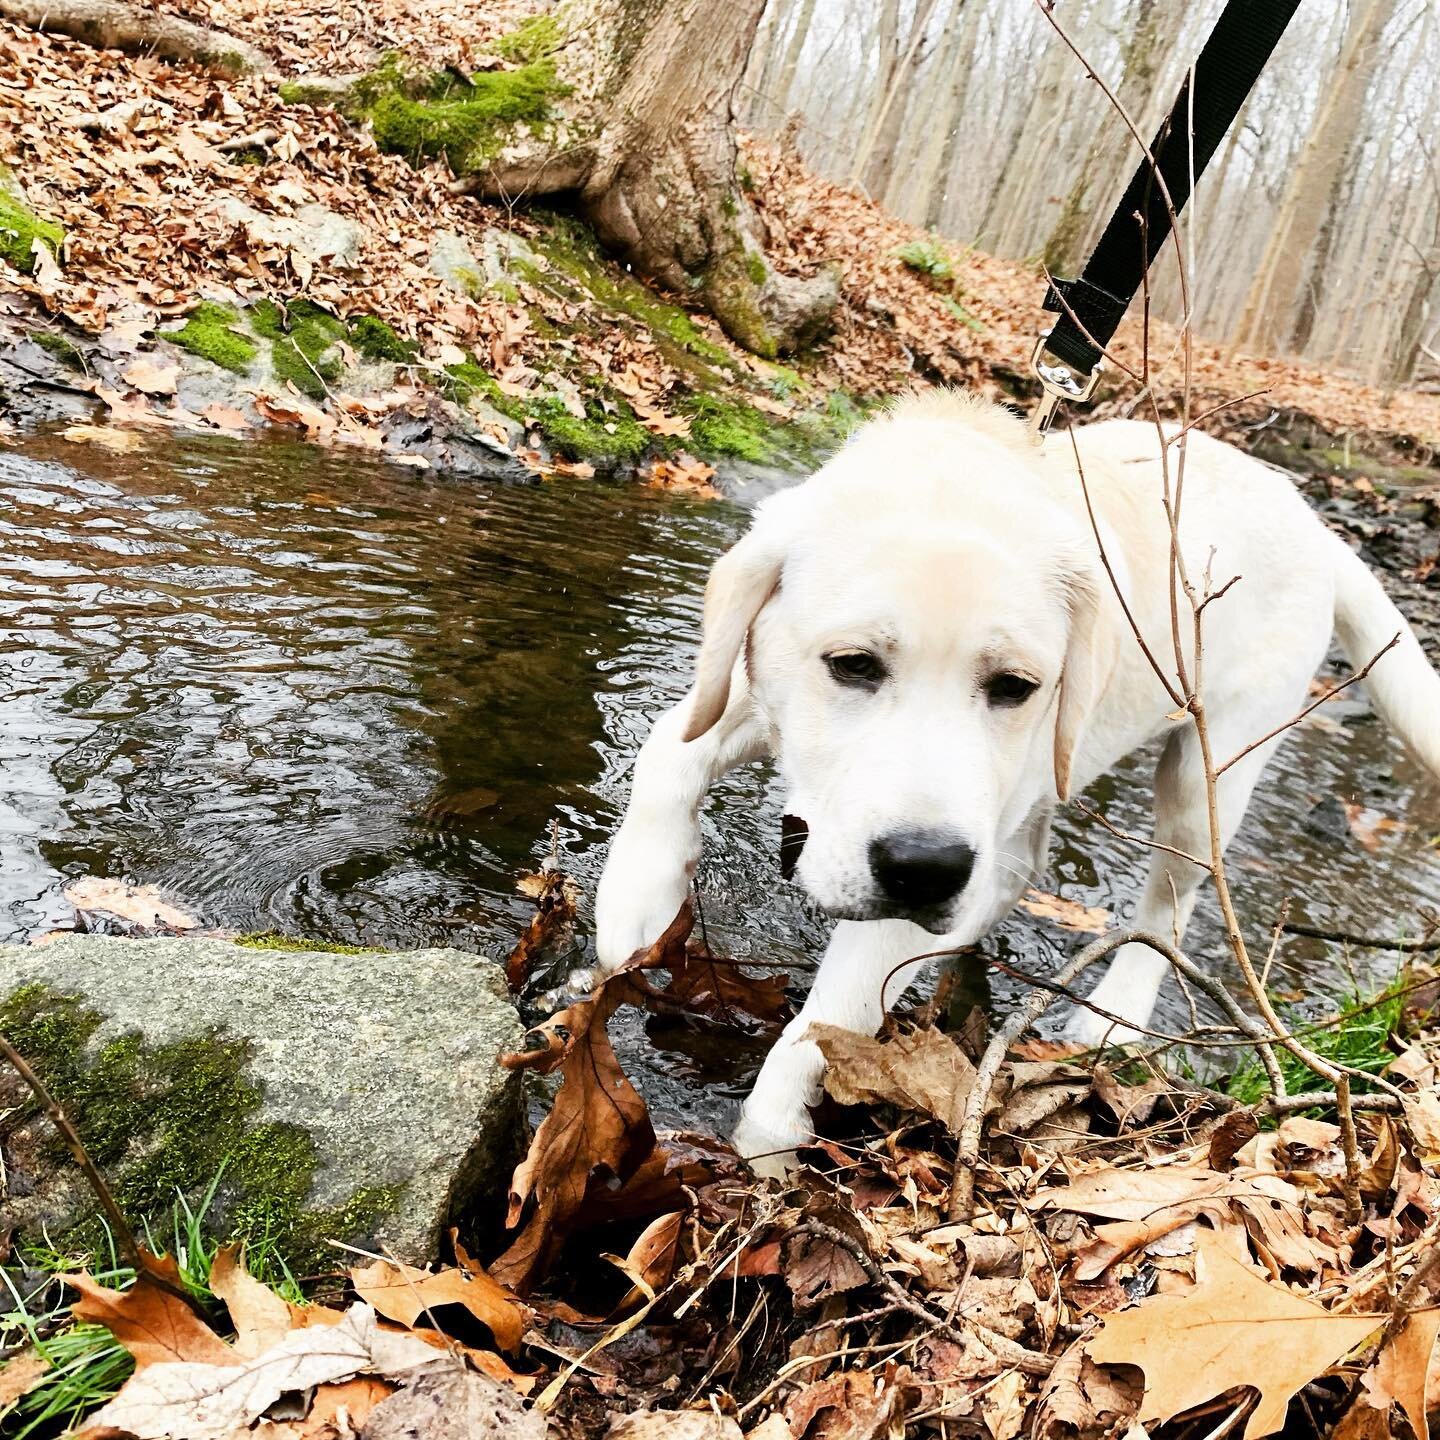 A warm welcome to our new puppy pack member, Ripple! Today Ripple successfully completed his first day of UNLEASH, our training program where dogs learn the skills necessary to hike the trails off-leash. Check out this awesome program and more at our